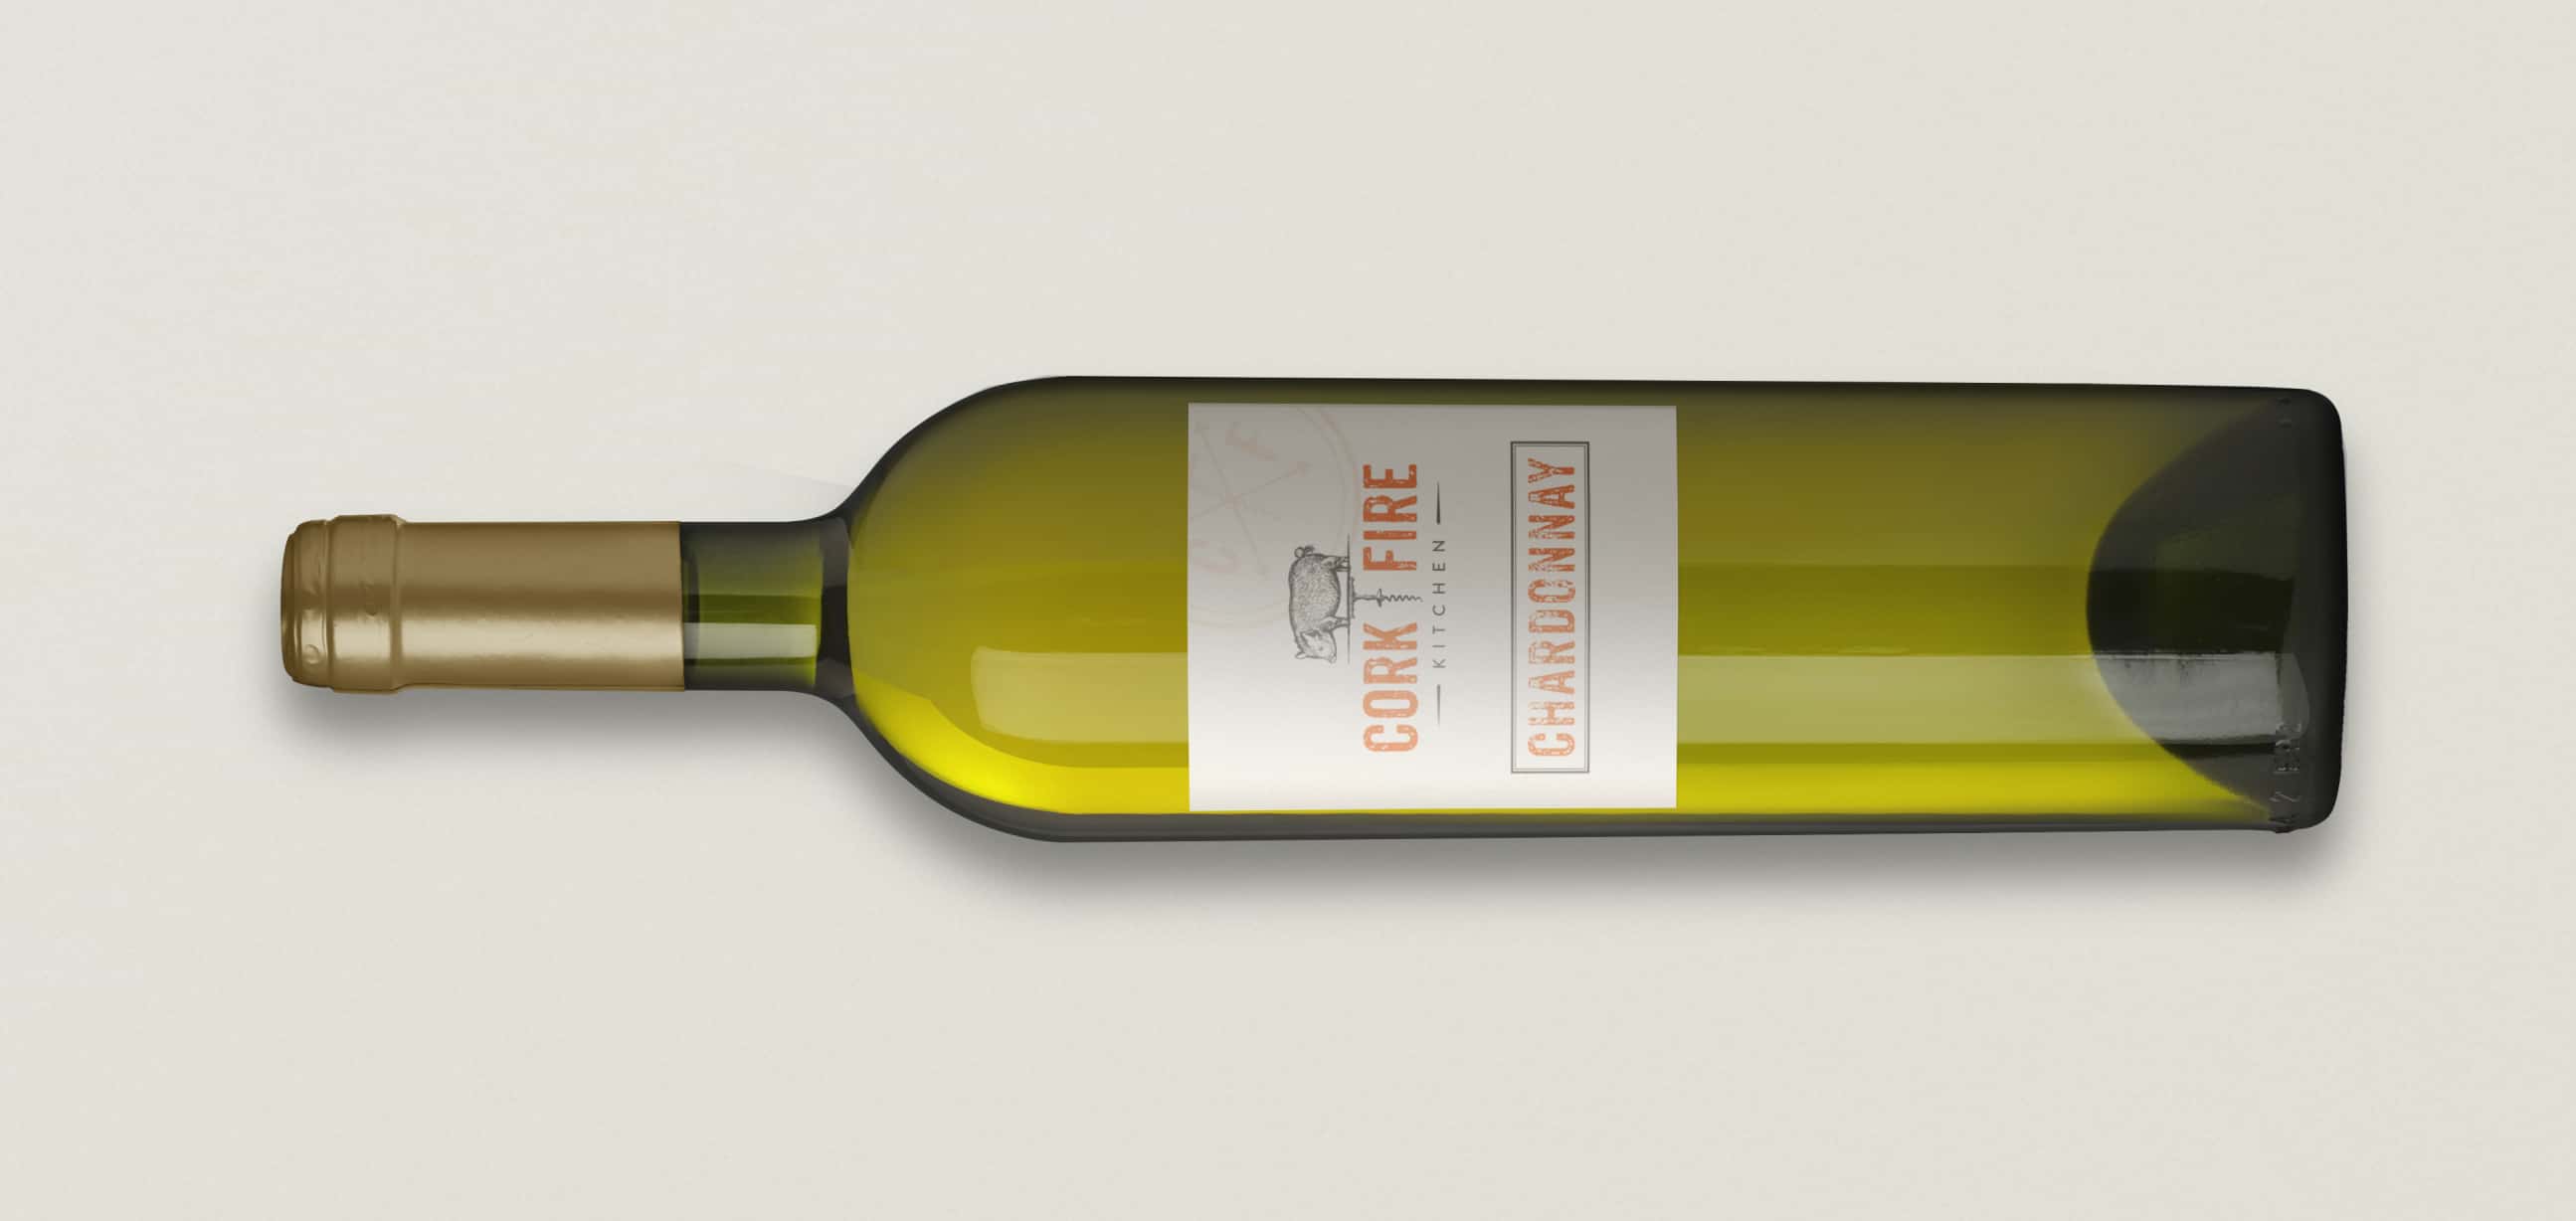 A bottle of 'CORK & FIRE Chardonnay' wine lying on its side, with a simple and elegant label indicating the wine variety and brand.